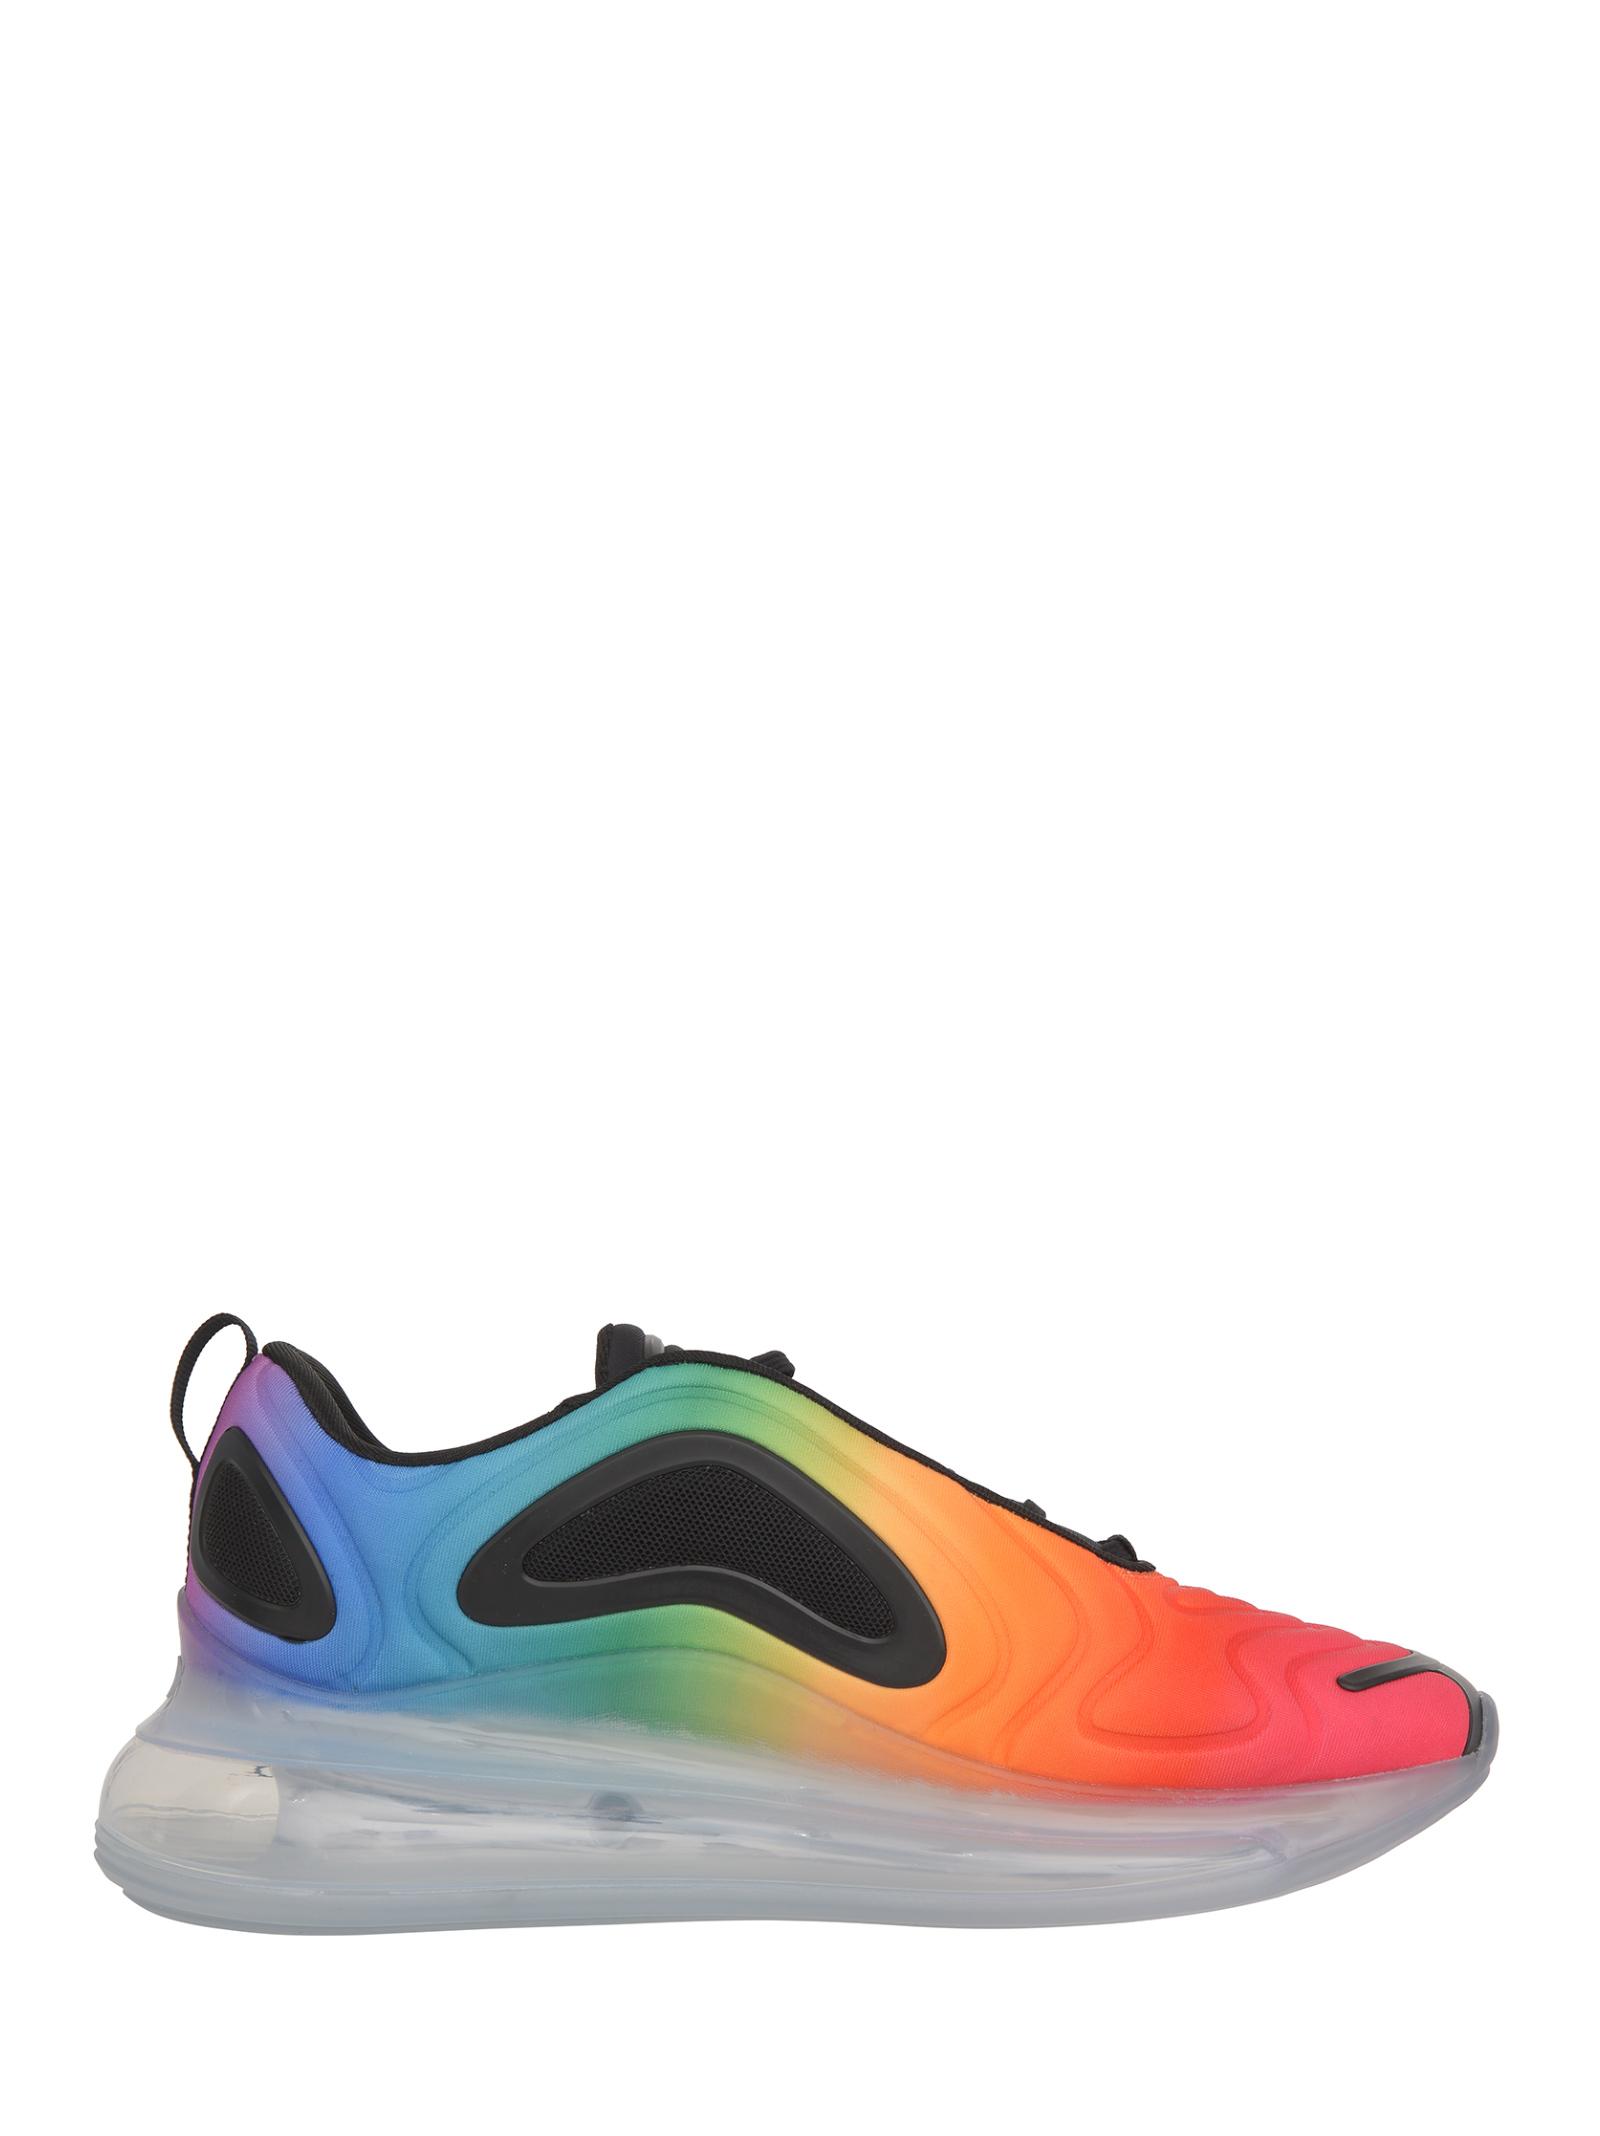 scrub Rich man Abandon Nike Air Max 720 Betrue Sneakers In Rainbow Colors With Visible Air Unit.  for Men | Lyst